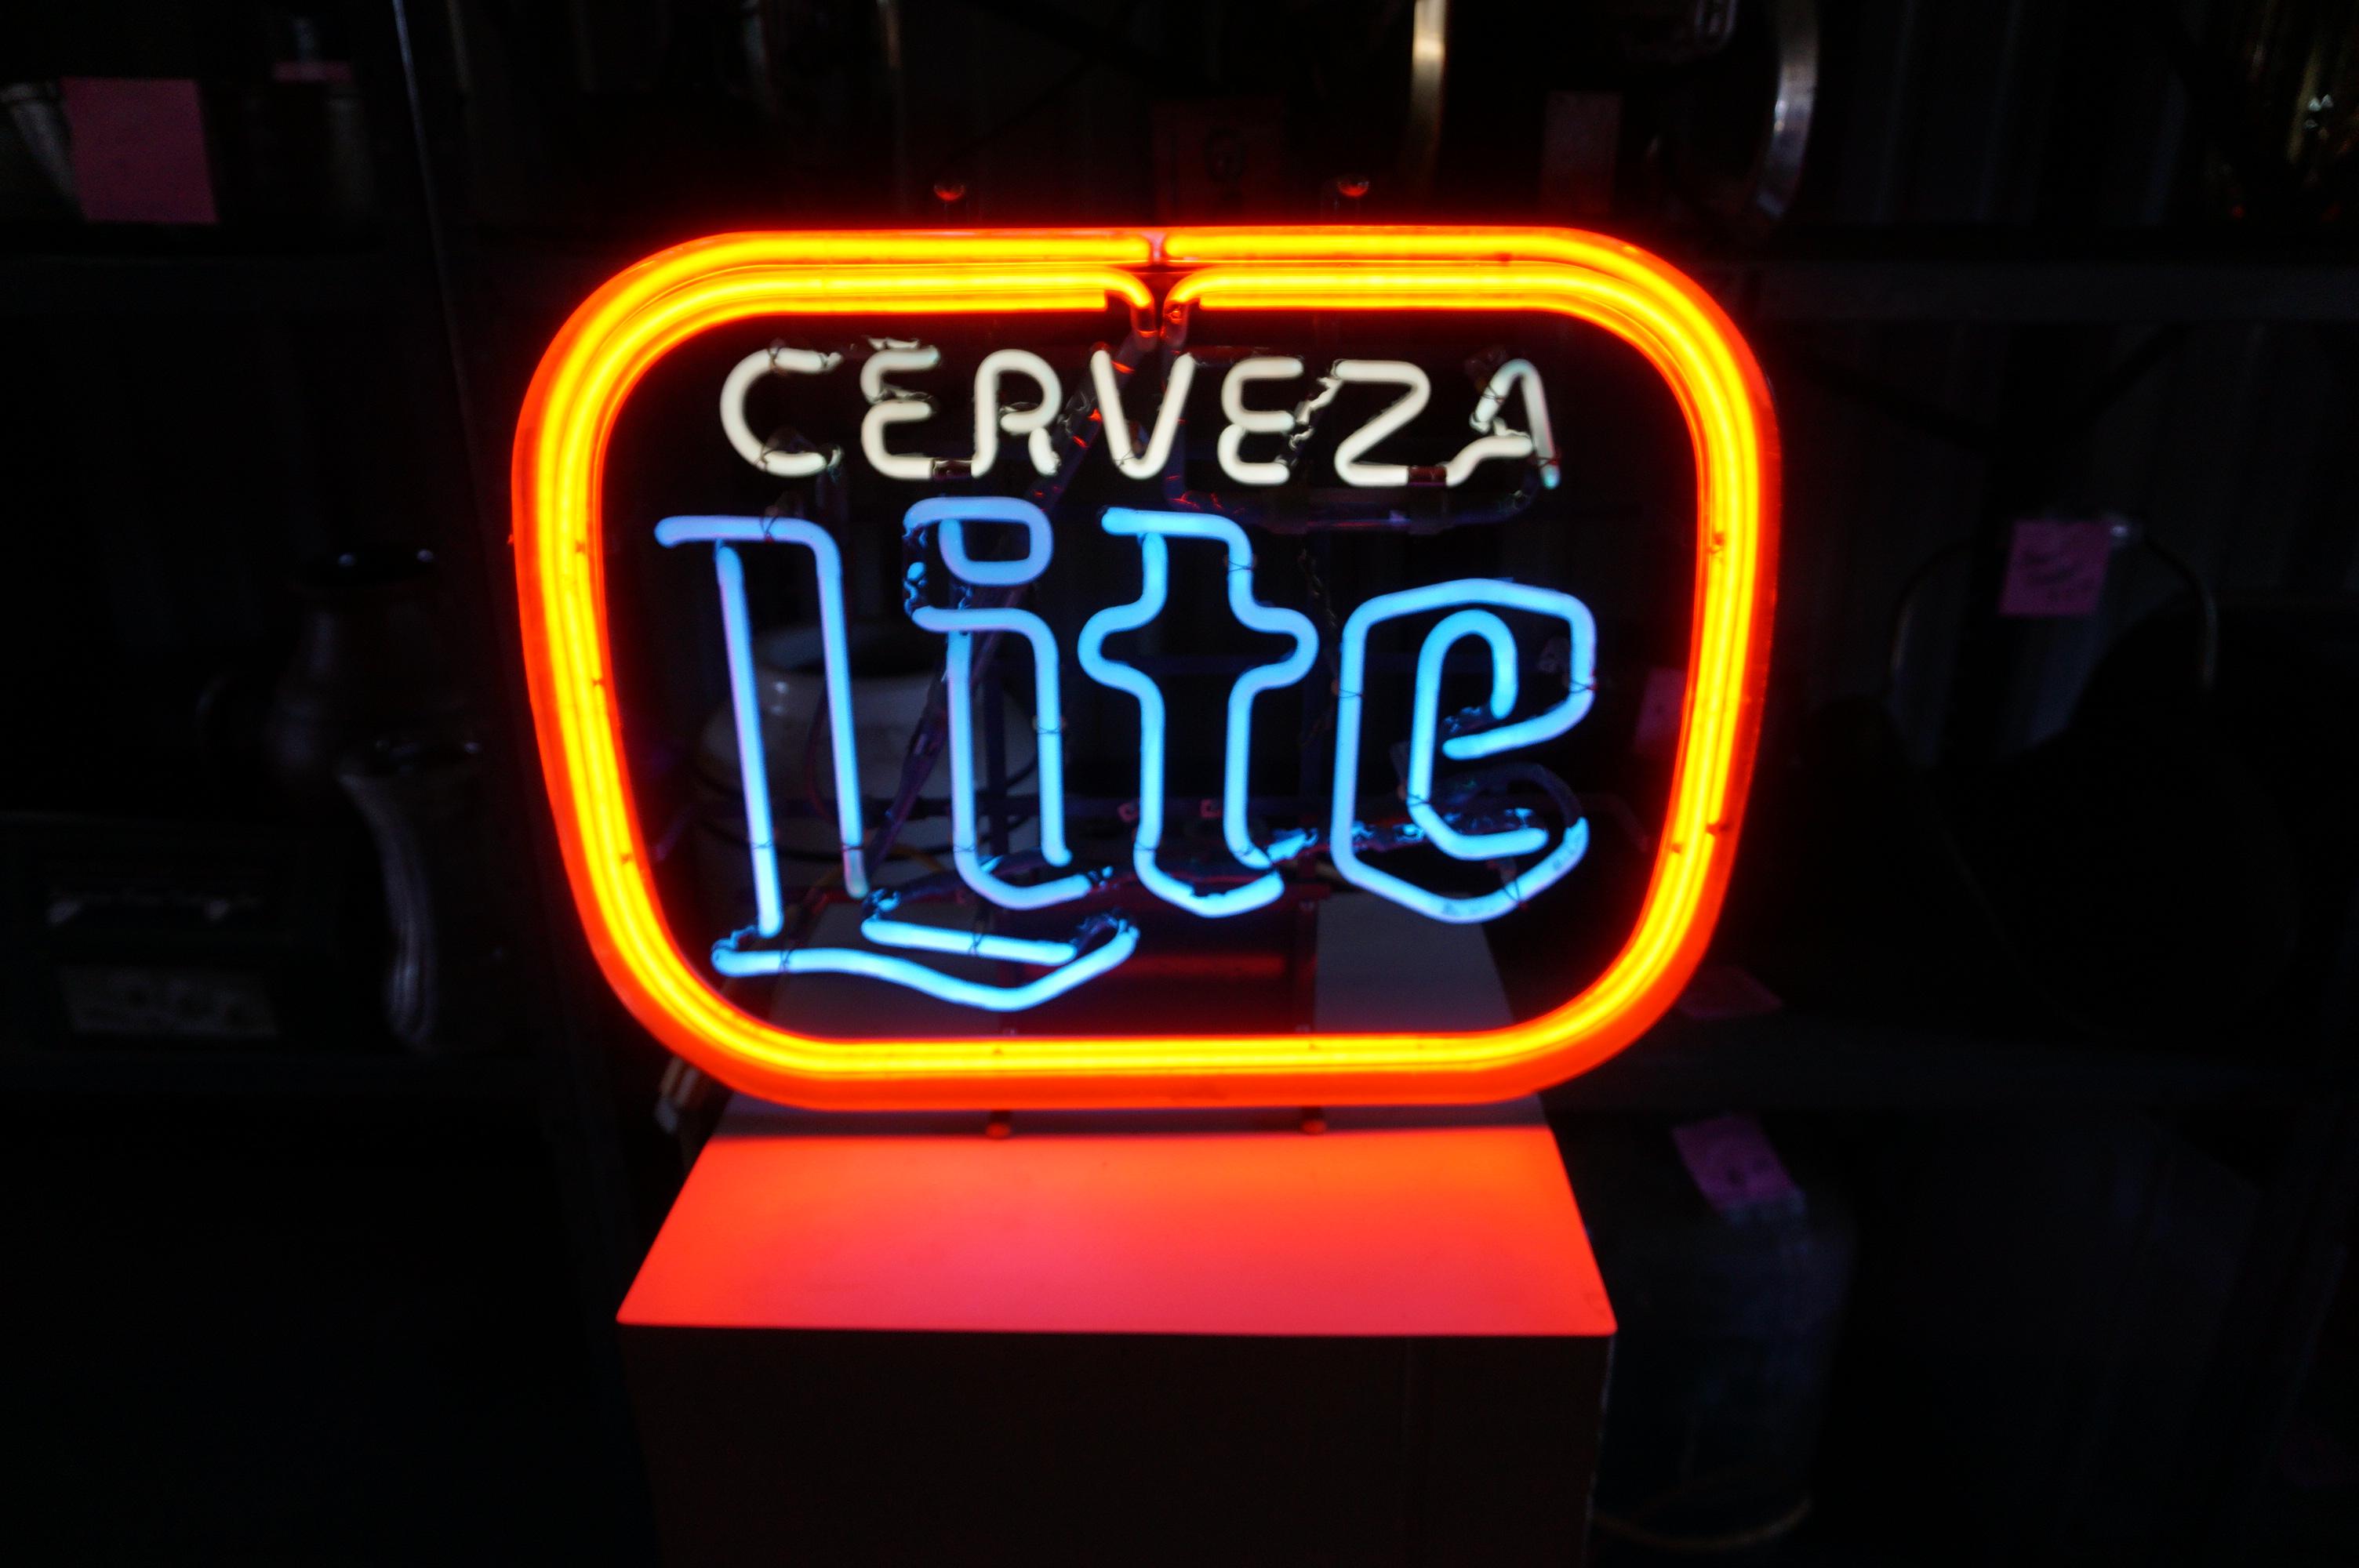 Cerveza Light Working Neon Sign, Older Model, Dirty from storage, NO SHIPPING! PICK-UP ONLY!